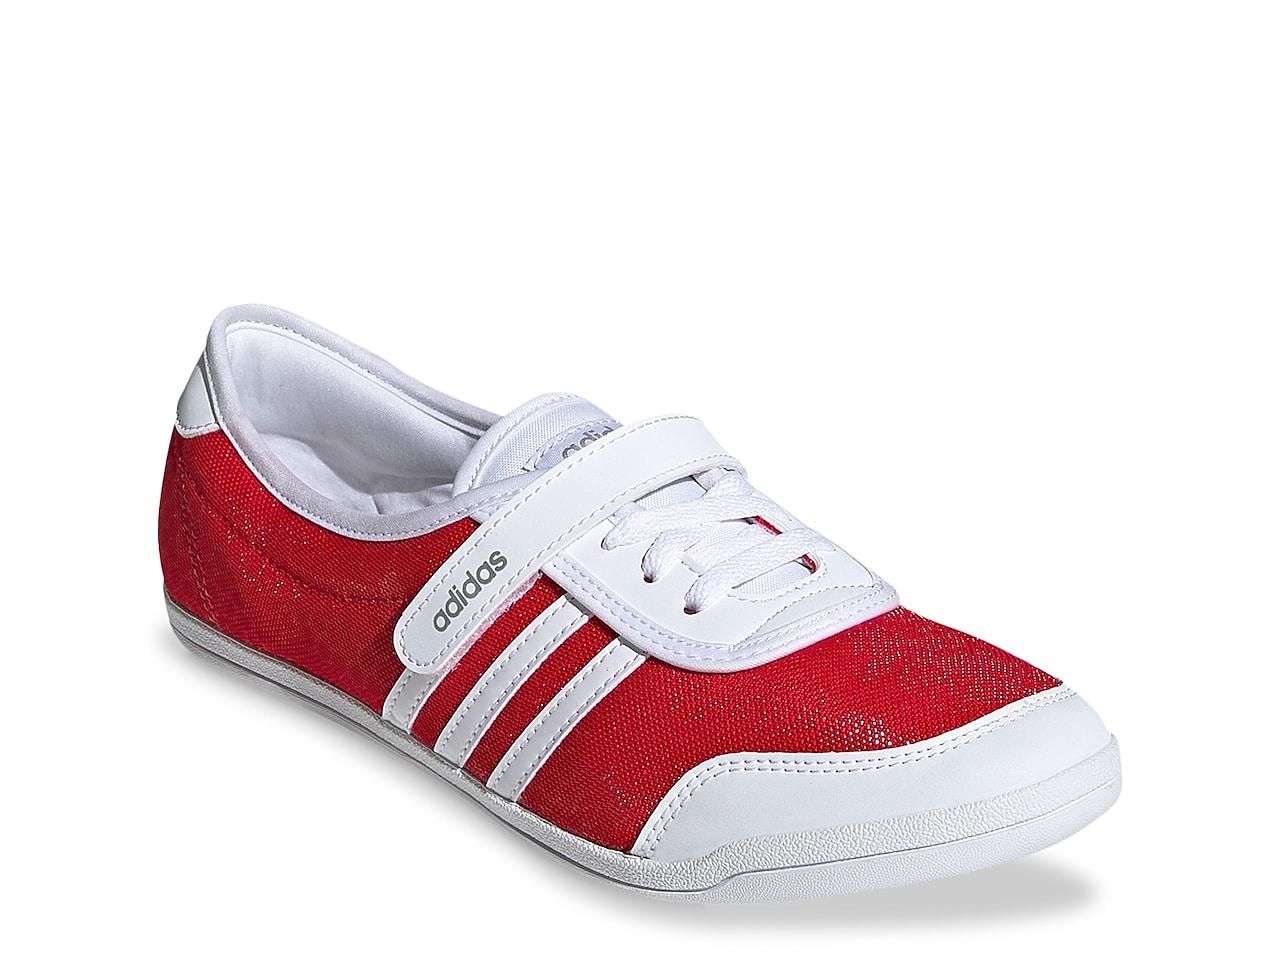 adidas Synthetic Diona Sneaker in Red - Lyst